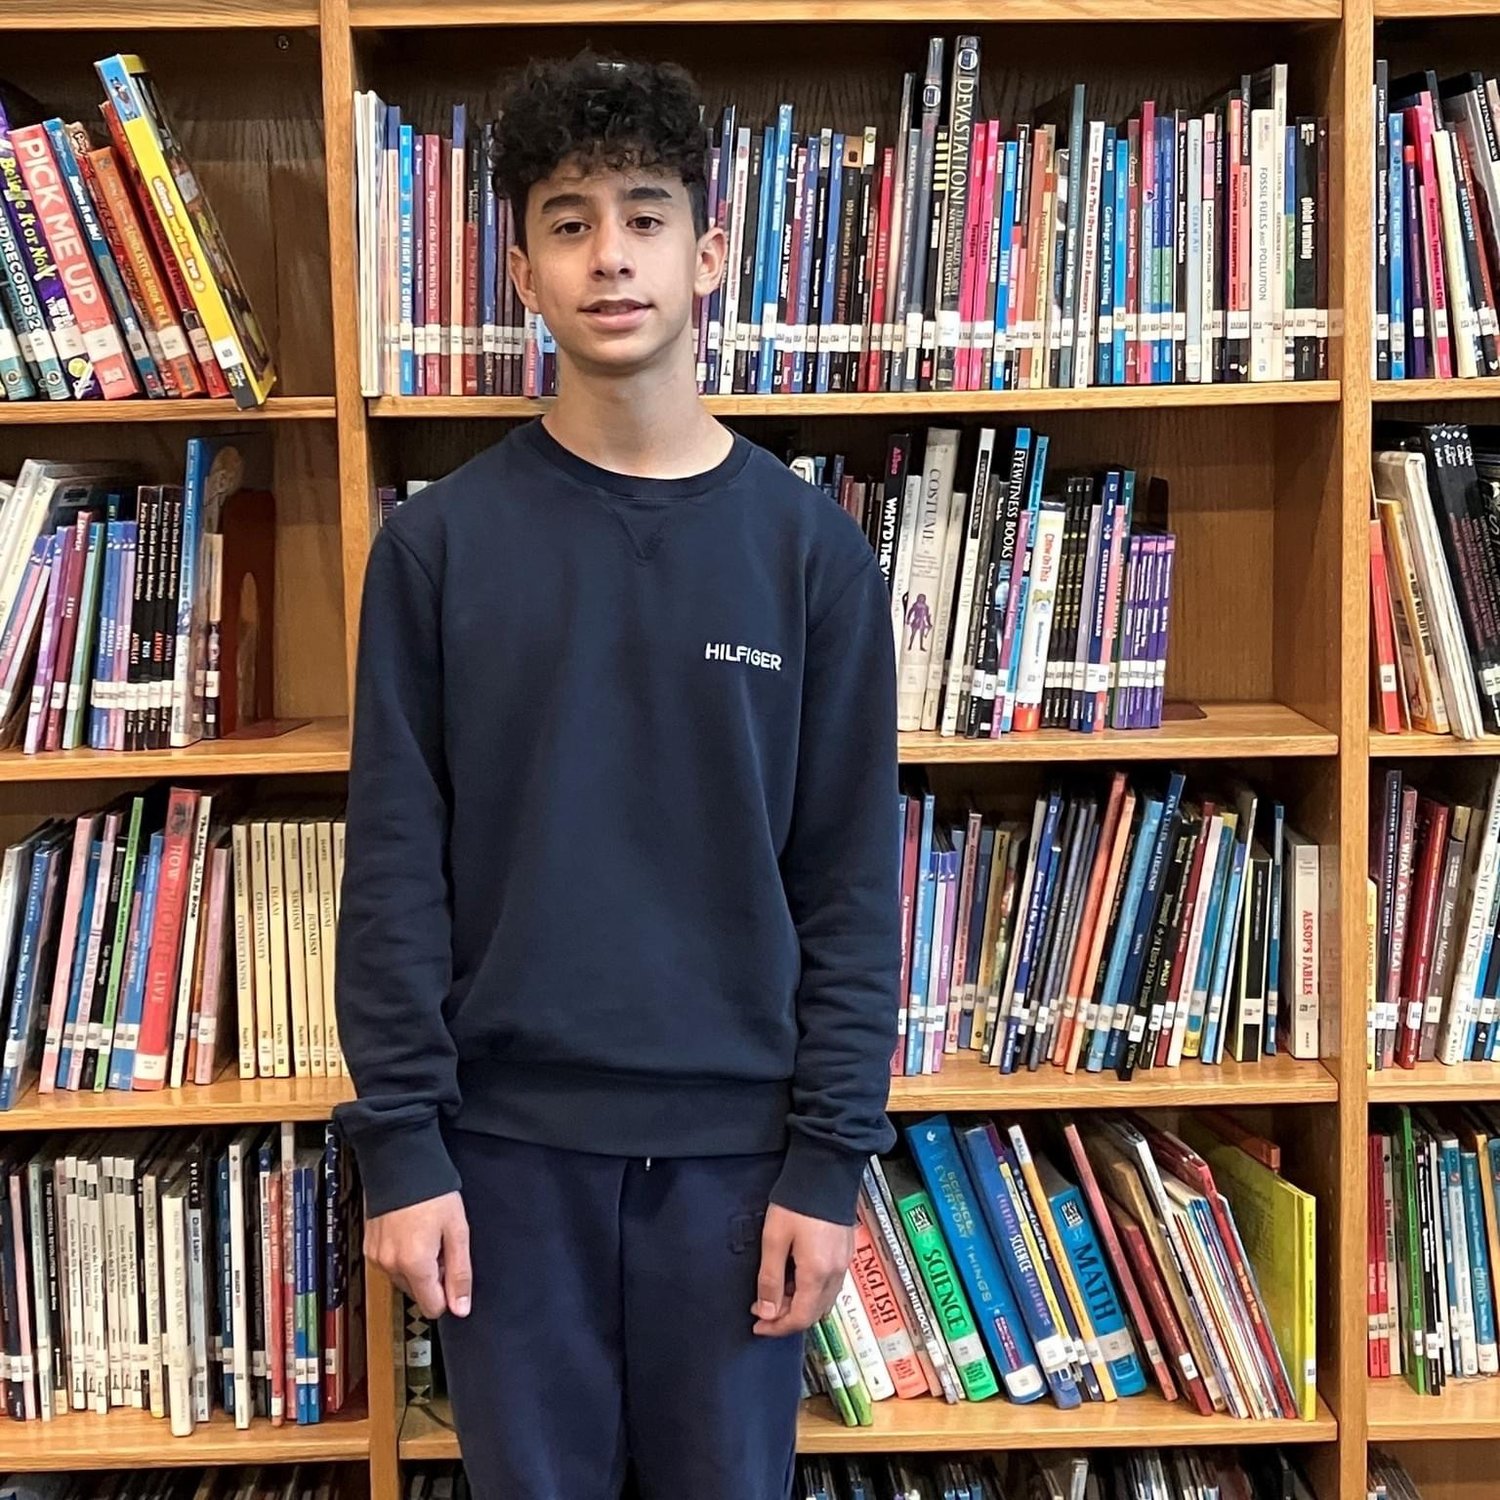 Woodmere Middle School eighth-grader Noam Sheerit earned an honorable mention for his poem ‘Triumphant Little Candle’ in the Walt Whitman Birthplace Association’s 36th annual student poetry contest.